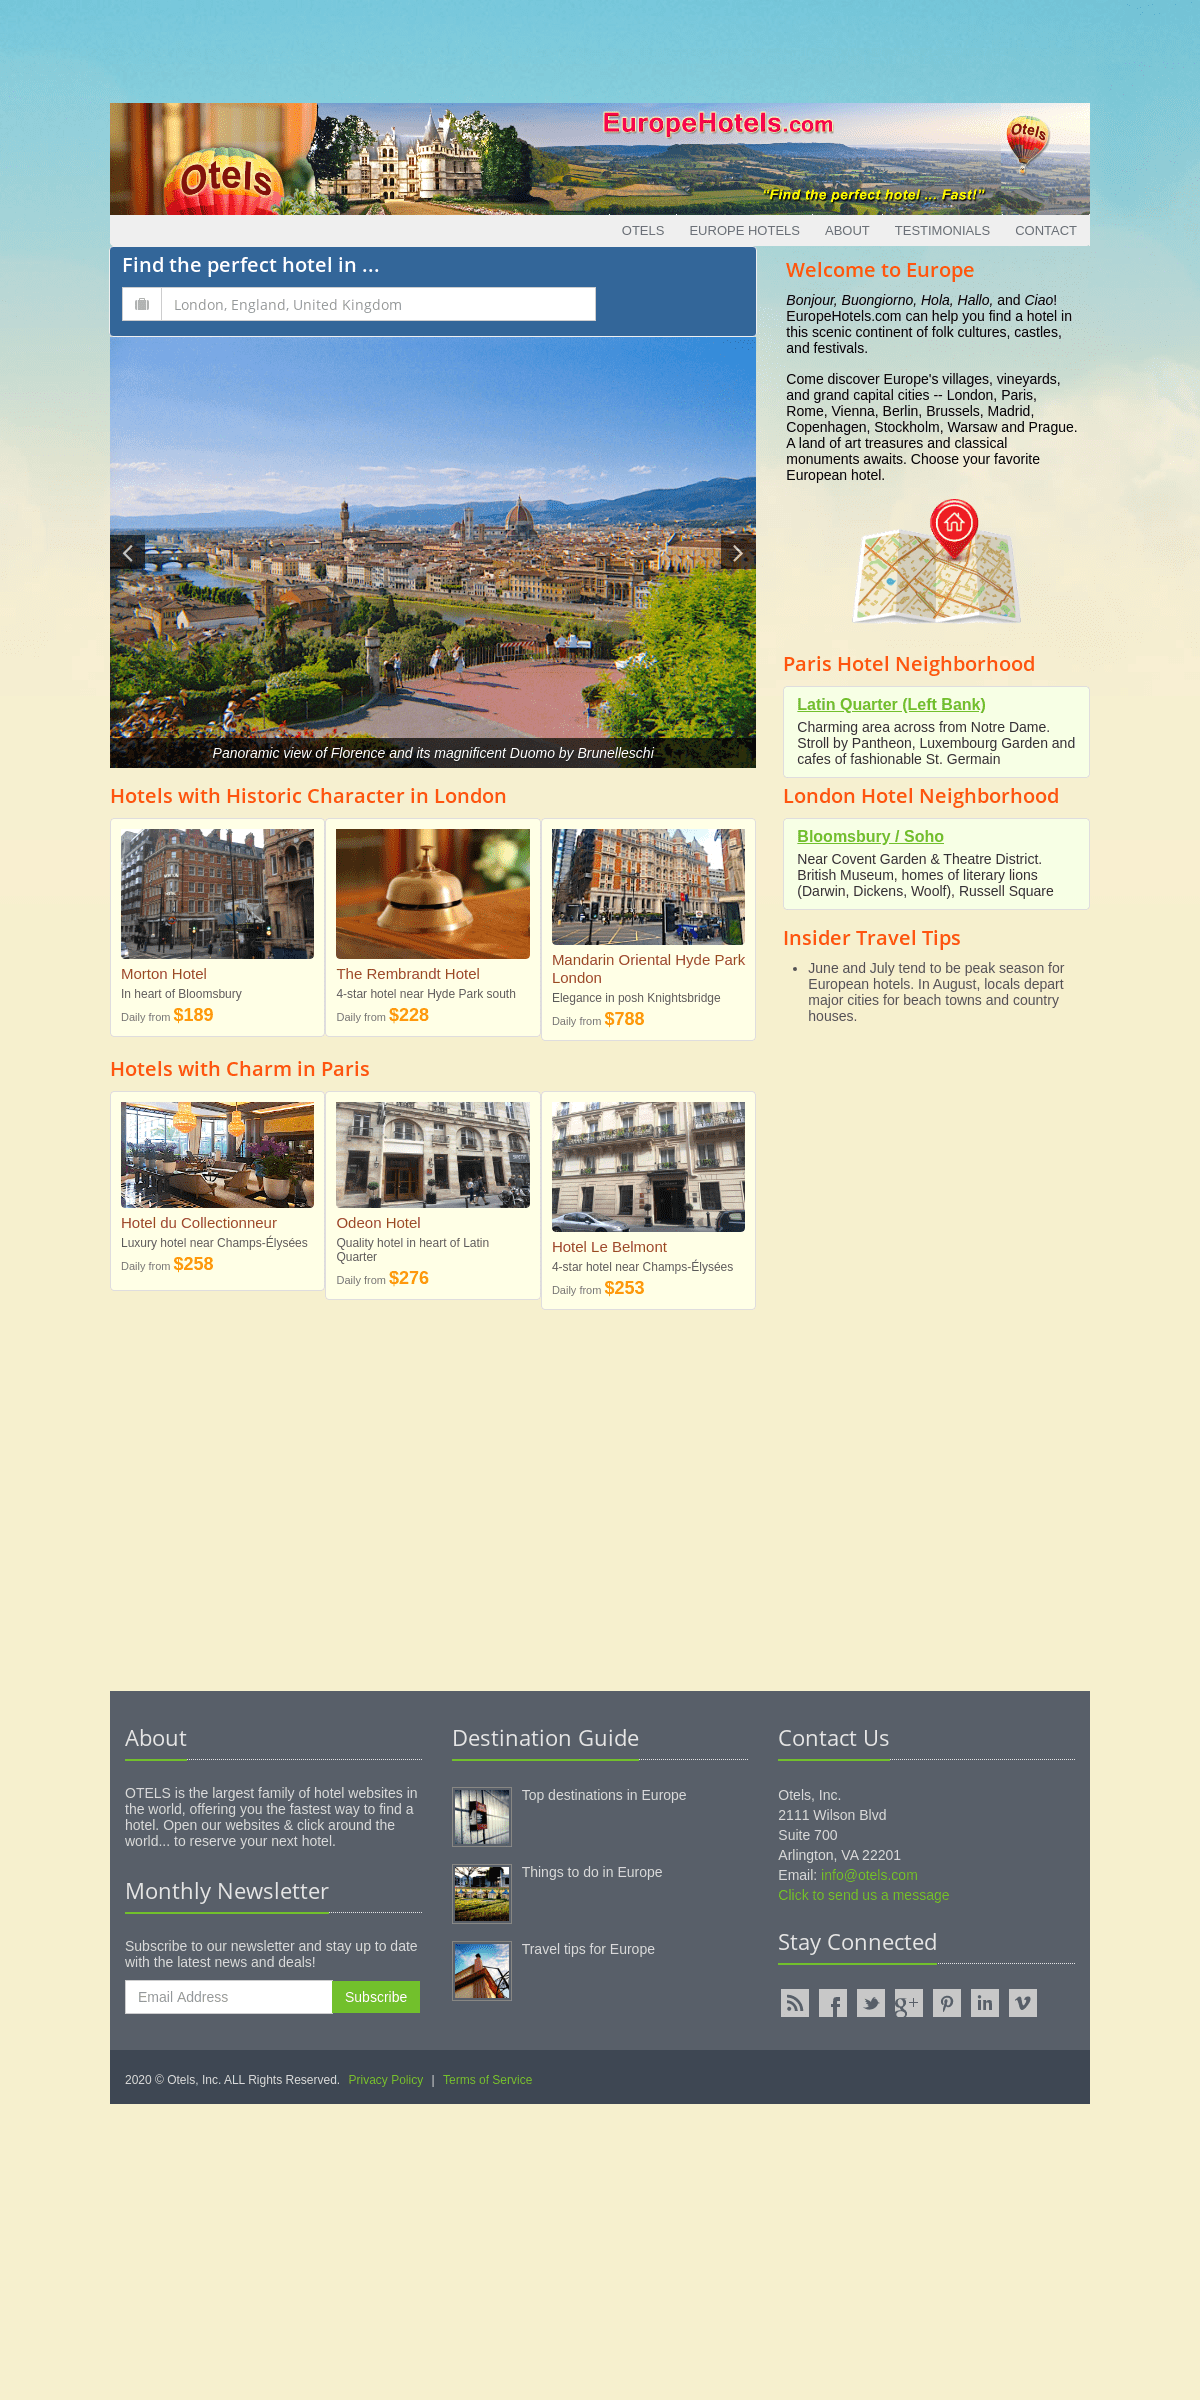 A complete backup of europehotels.com